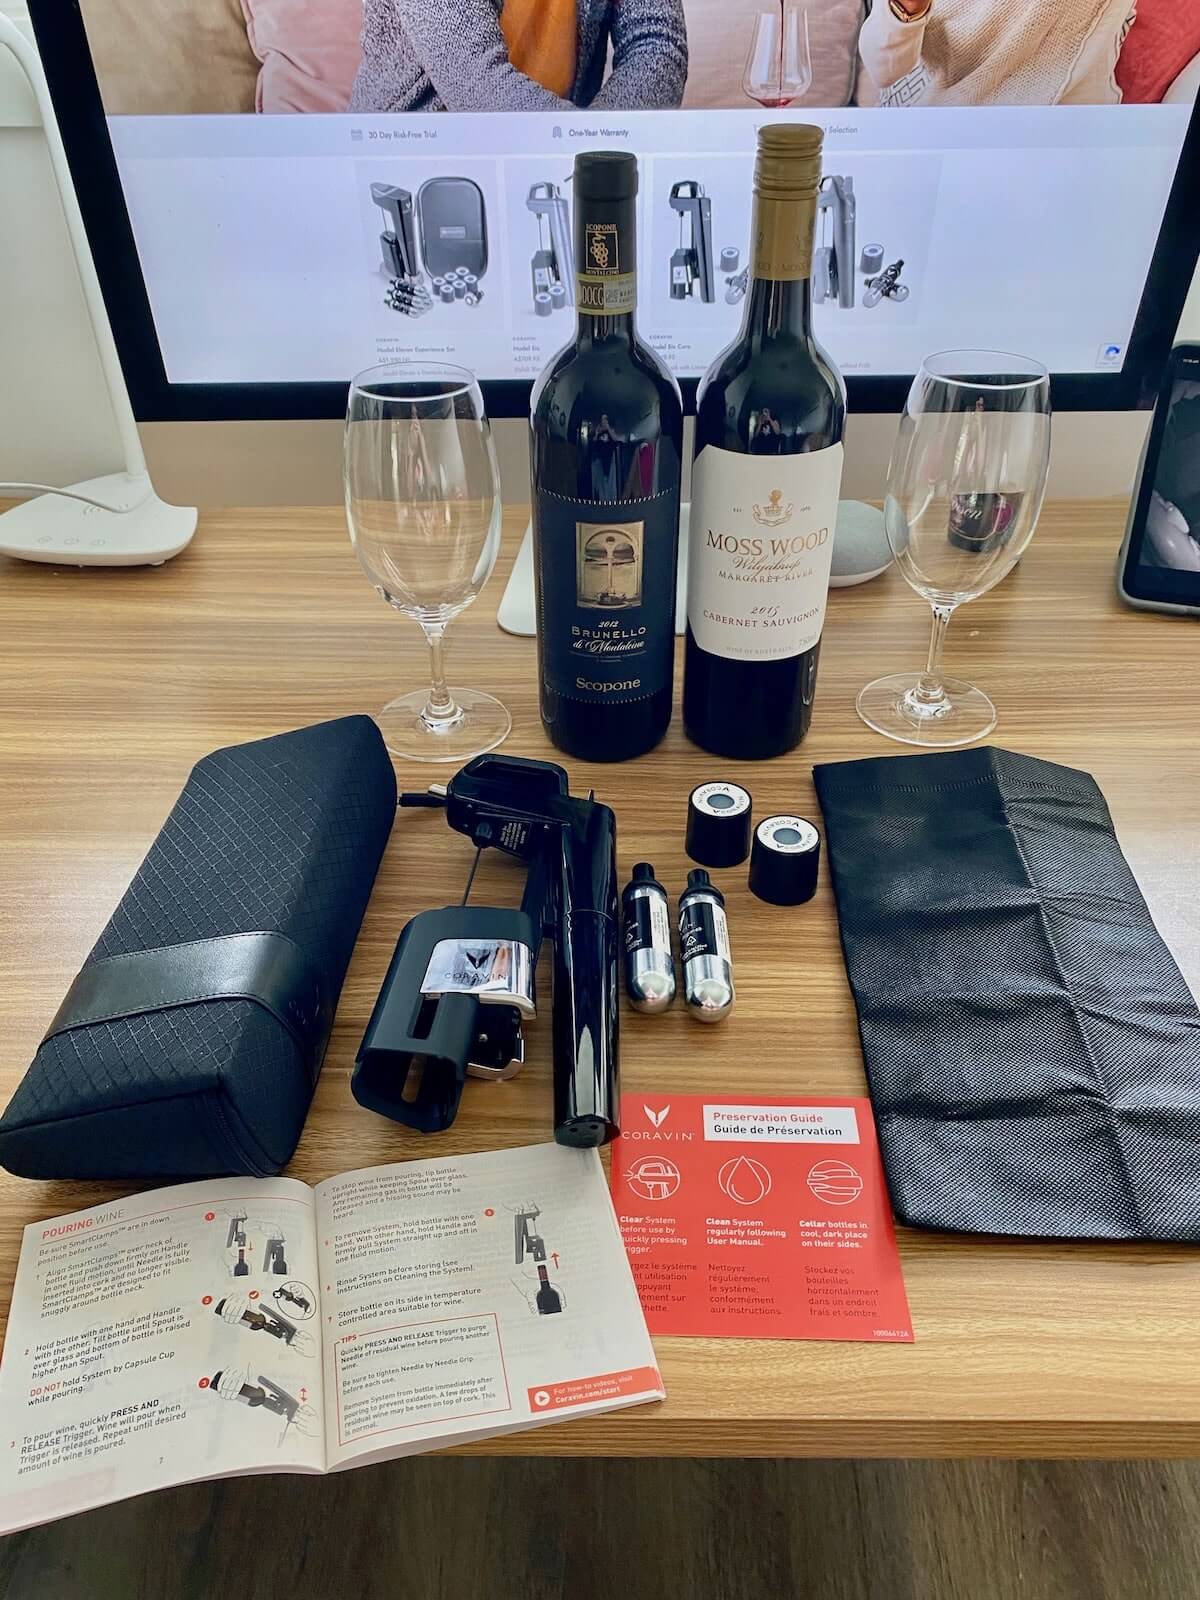 Product Testing the Coravin Wine Preservation System